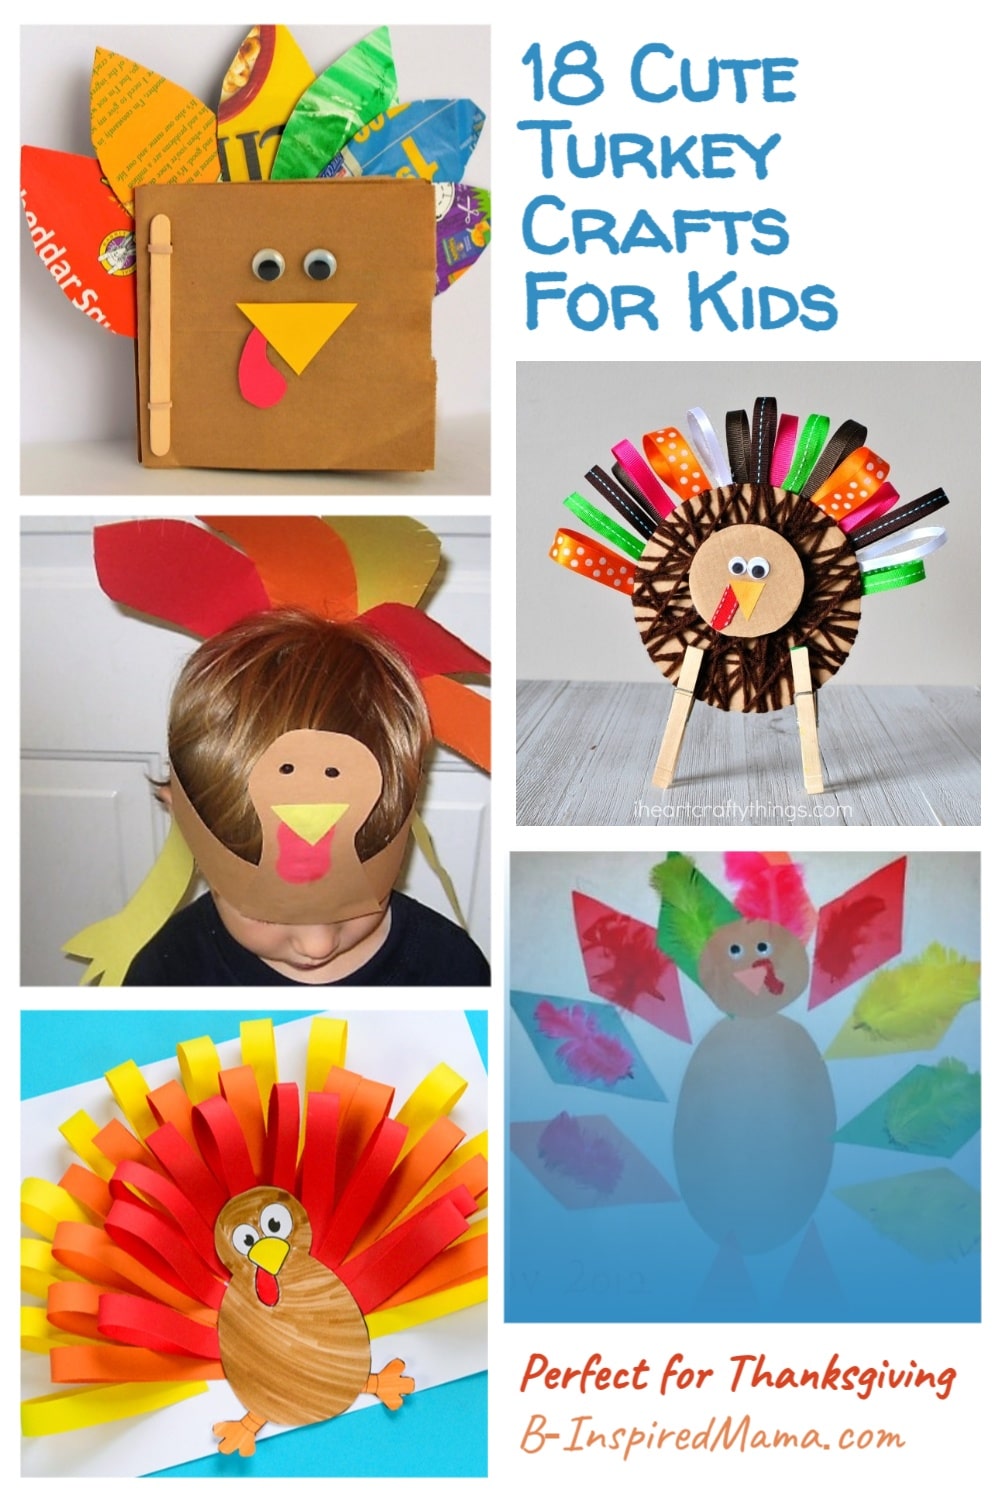 Collage of pictures of kids turkey crafts with text reading 18 Cute Turkey Crafts for Kids.